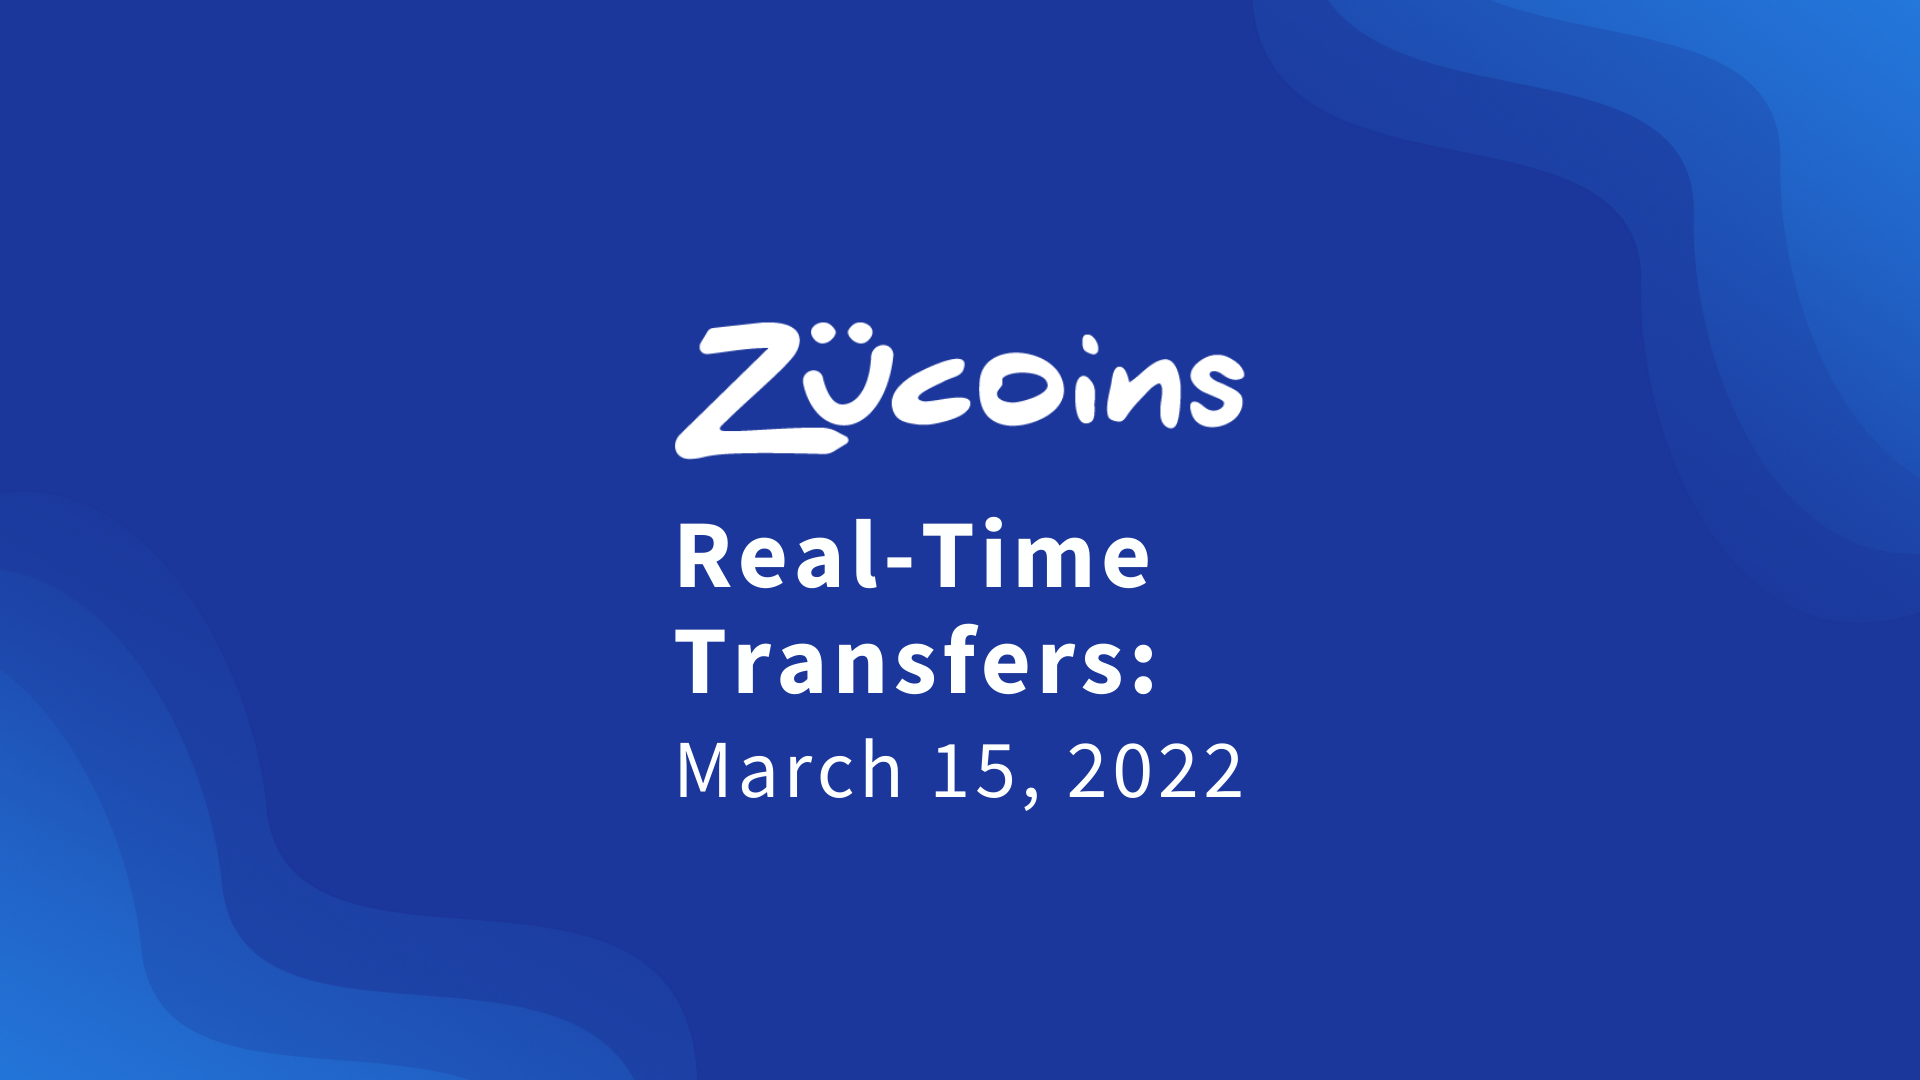 Zucoins Real-Time Transfers